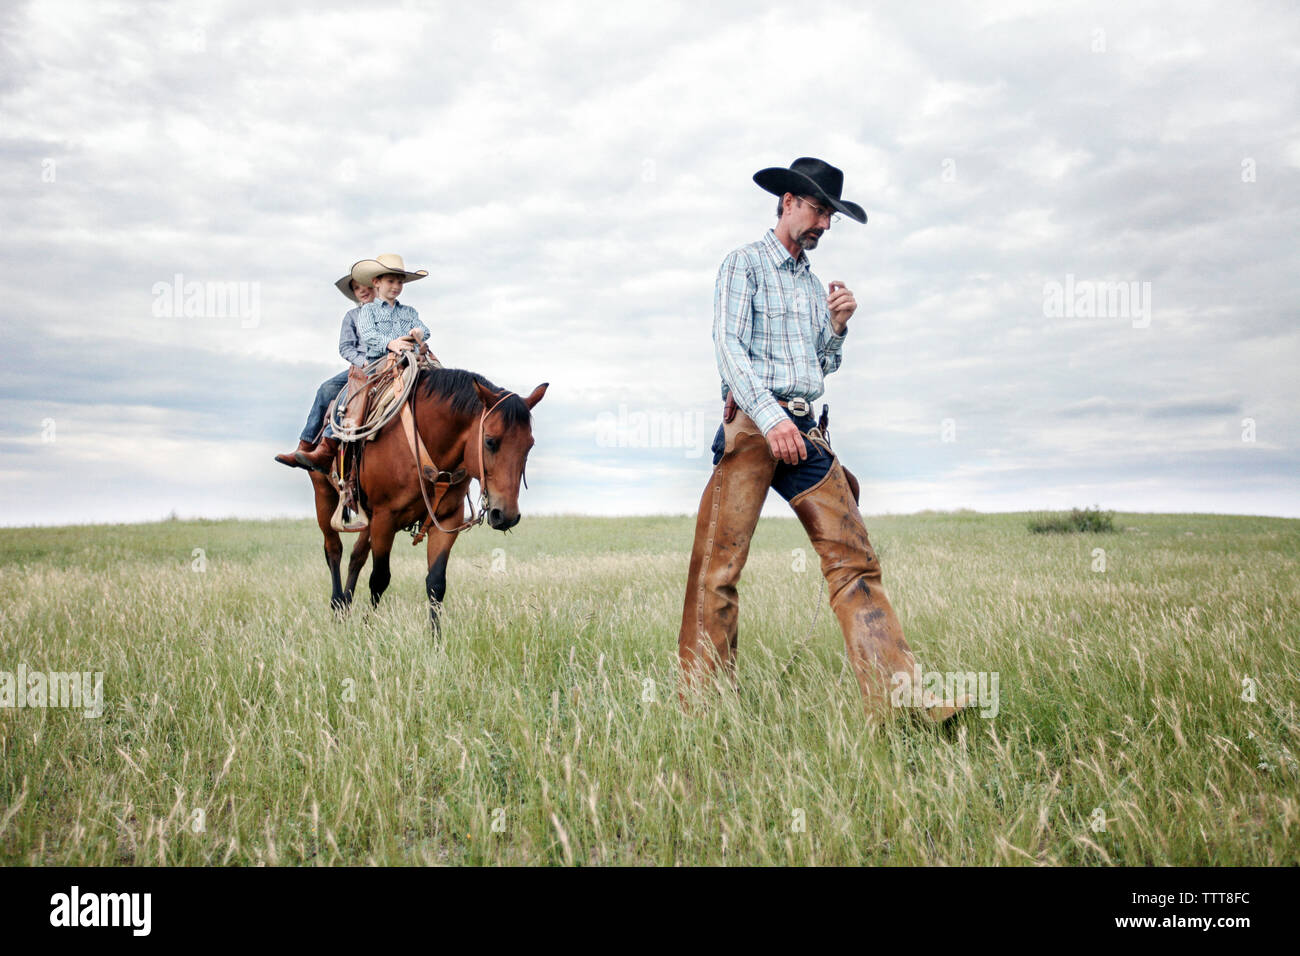 Father walking while sons riding horse on field against cloudy sky Stock Photo